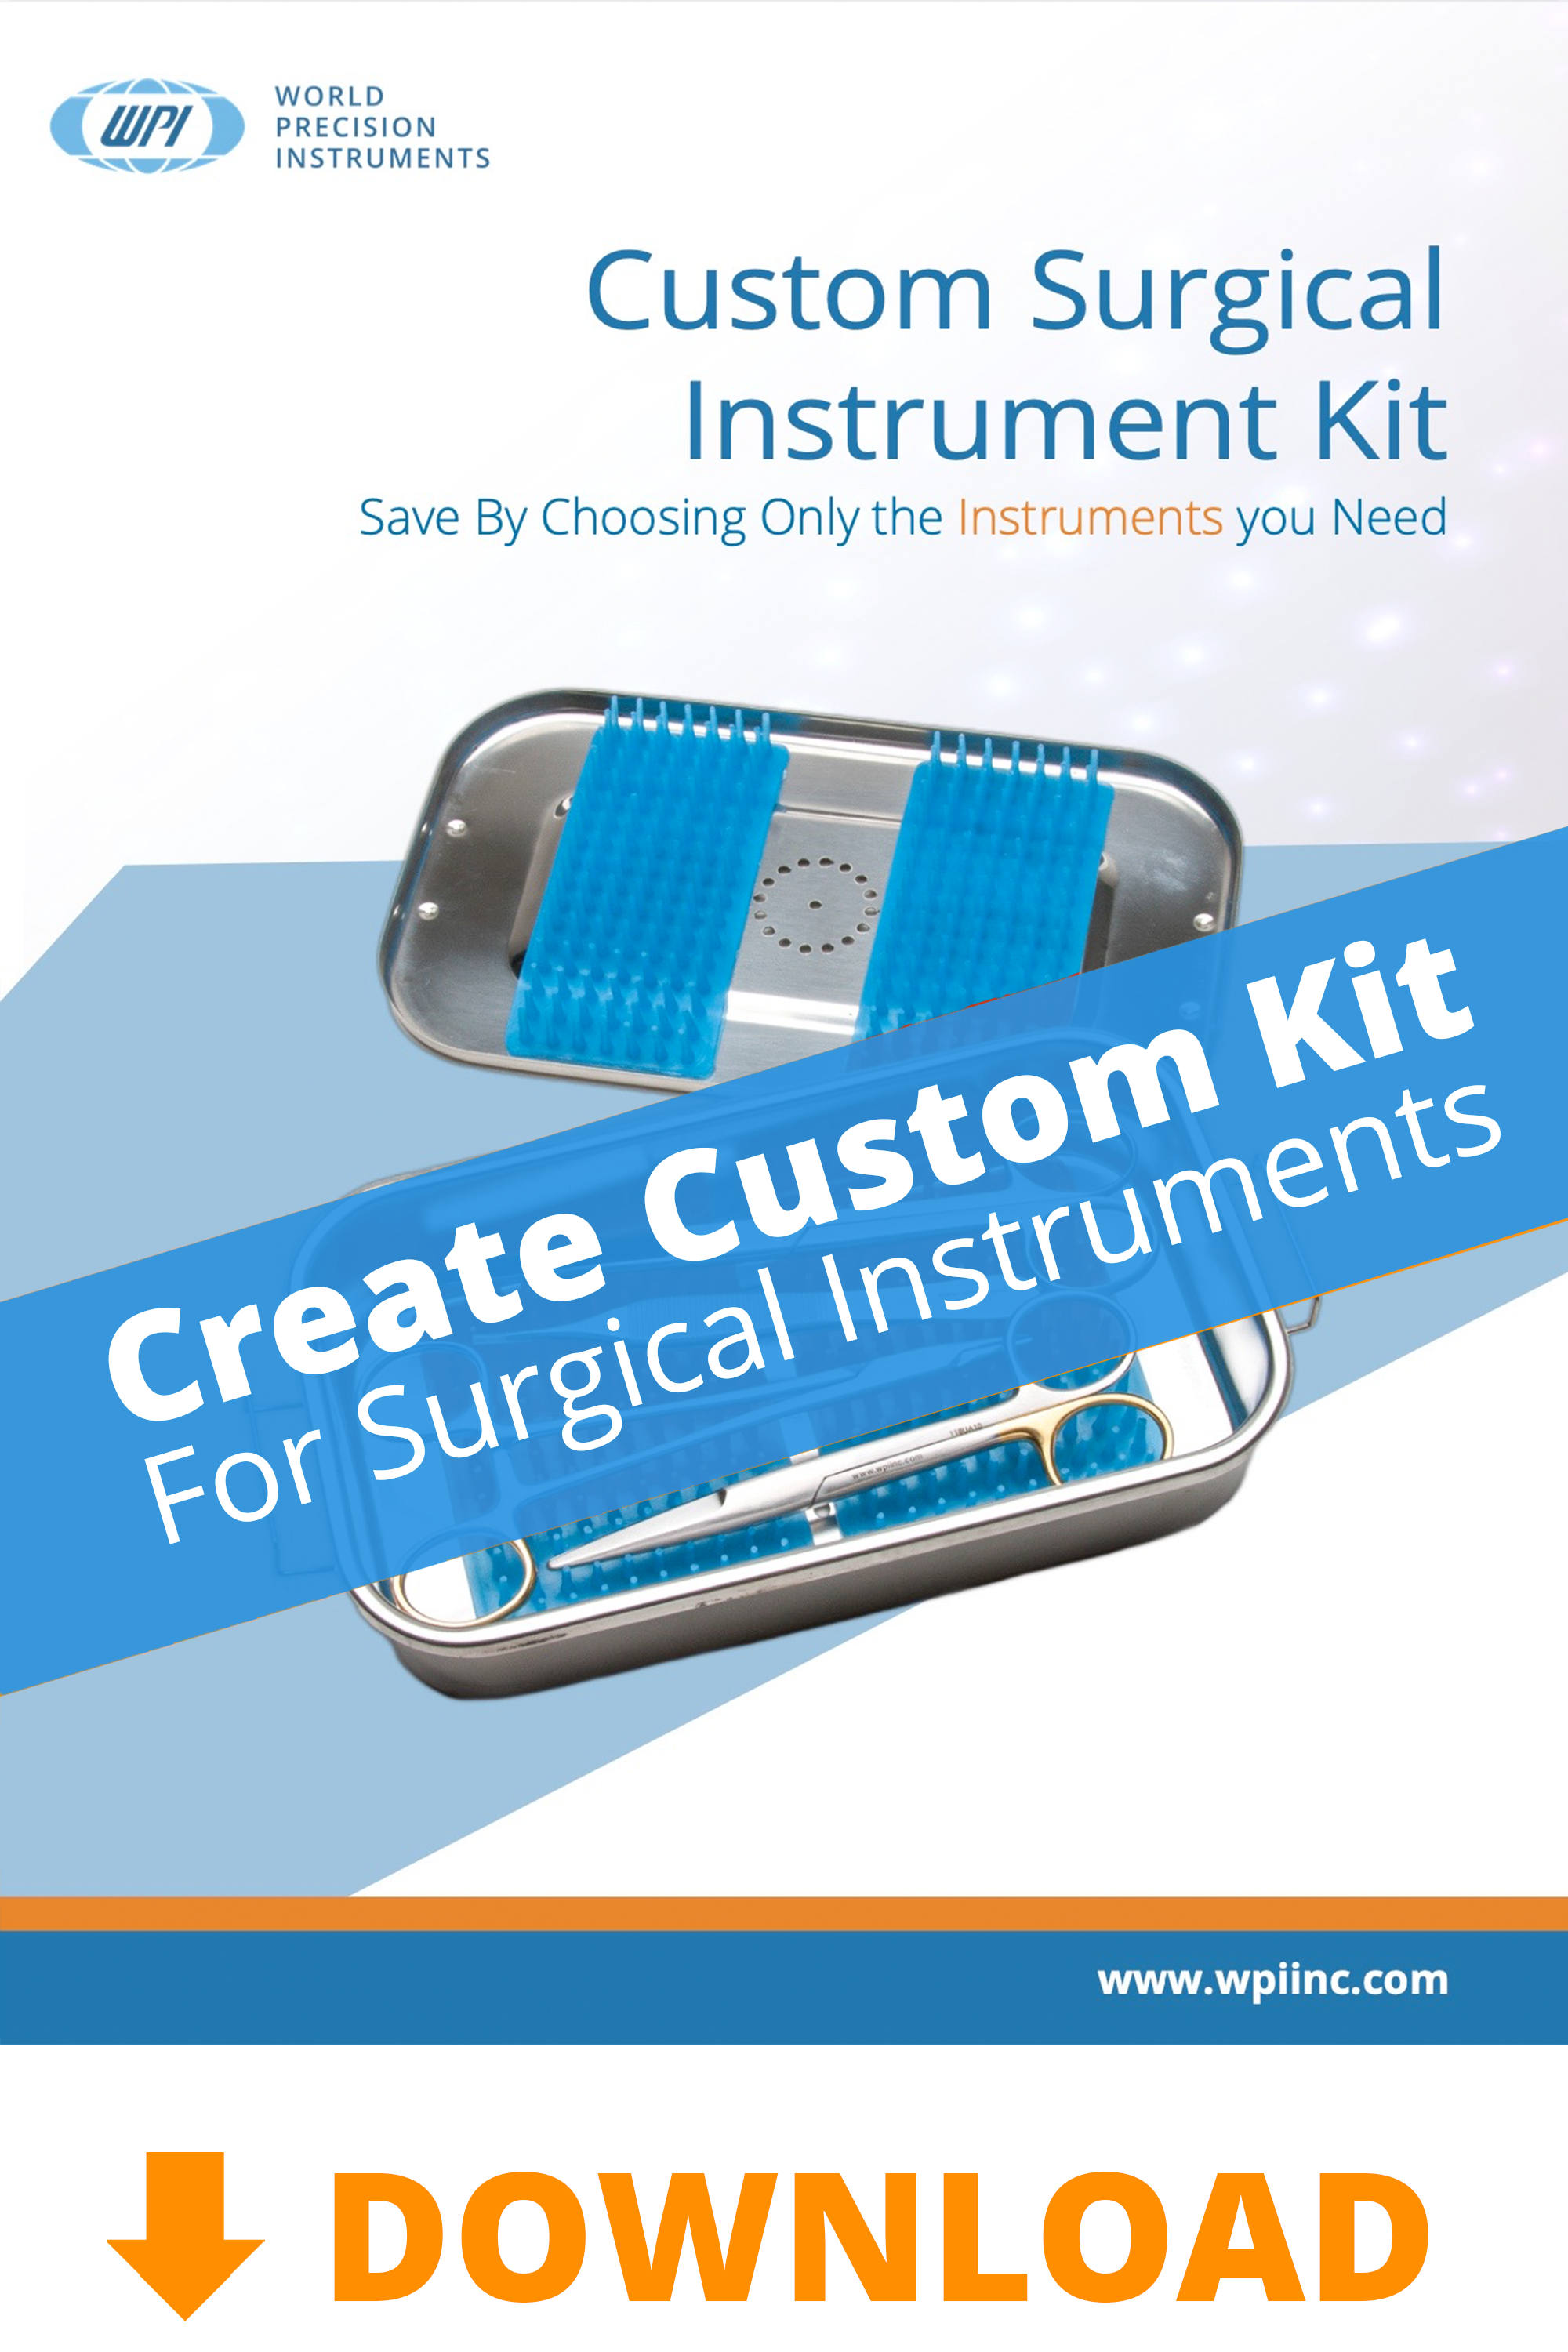 Download the brochure to see how easy it is to customize a surgical instrument kit